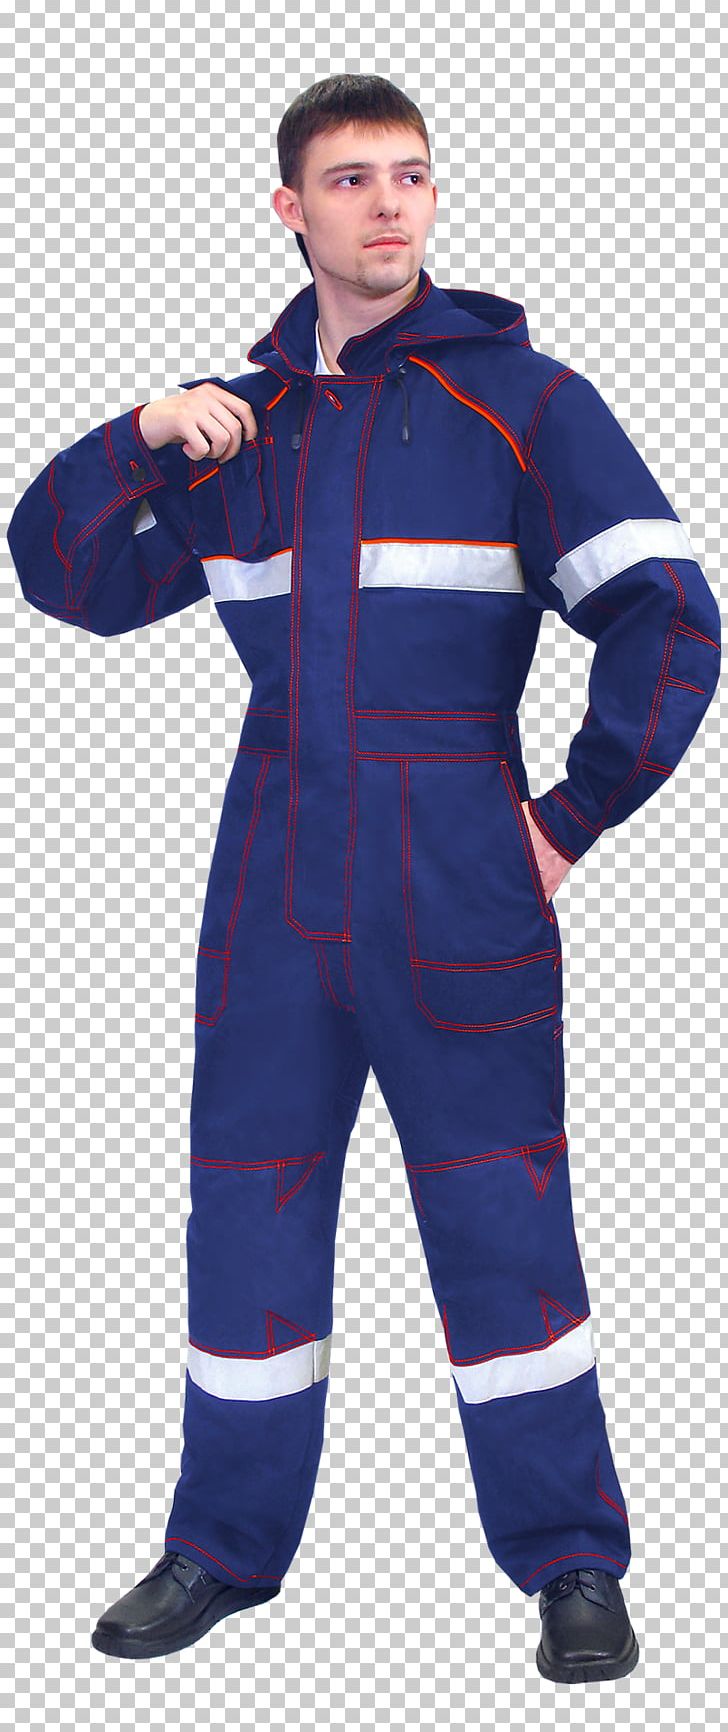 Kovcheh Costume Clothing Price Workwear PNG, Clipart, Blue, Boilersuit, Button, Clothing, Cobalt Blue Free PNG Download